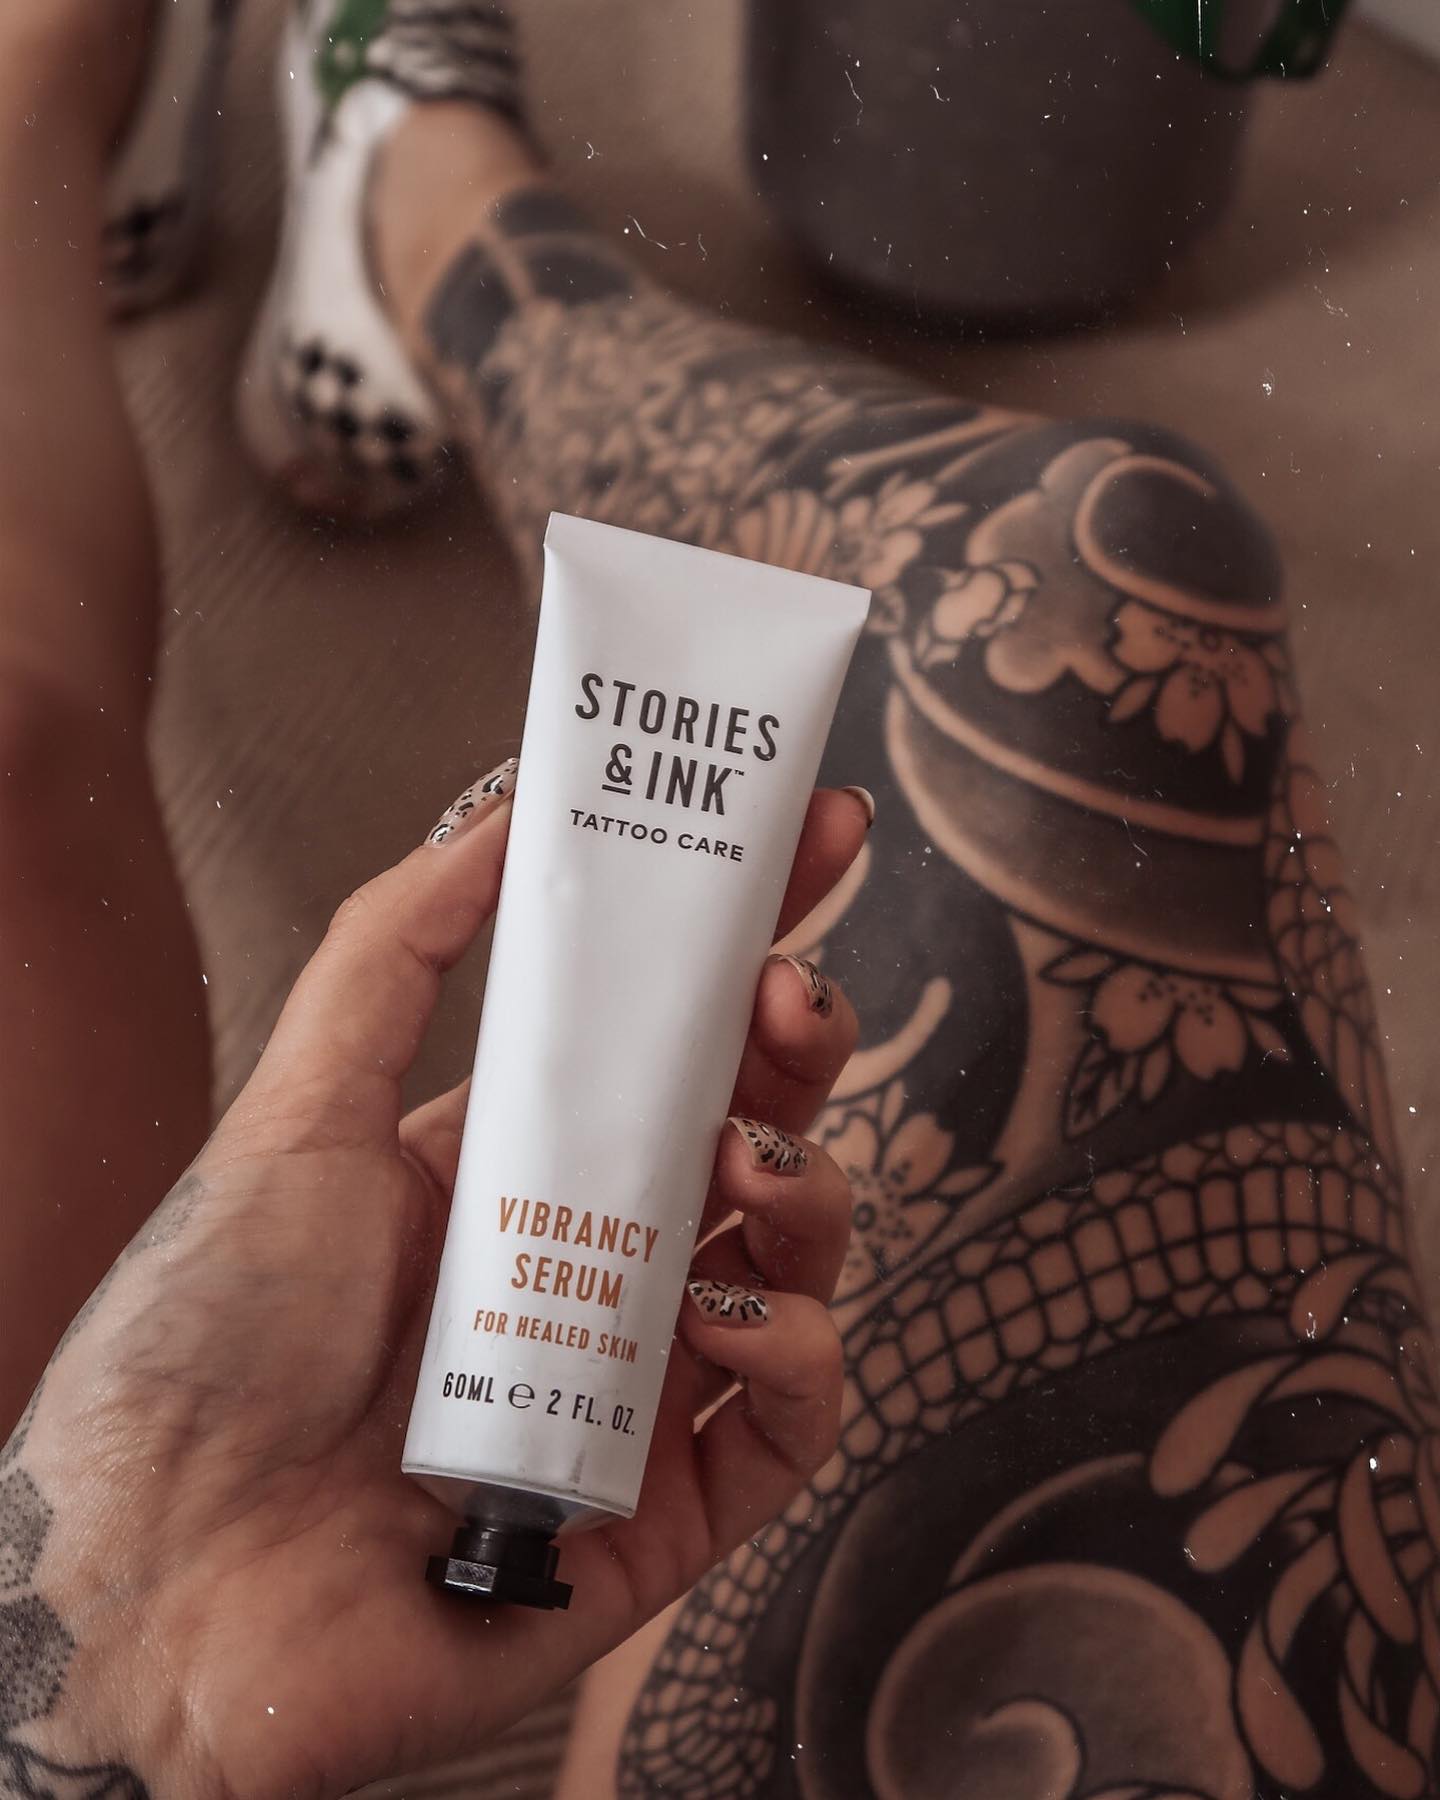 Tattoo Moisturizing A Quick Look at the Facts